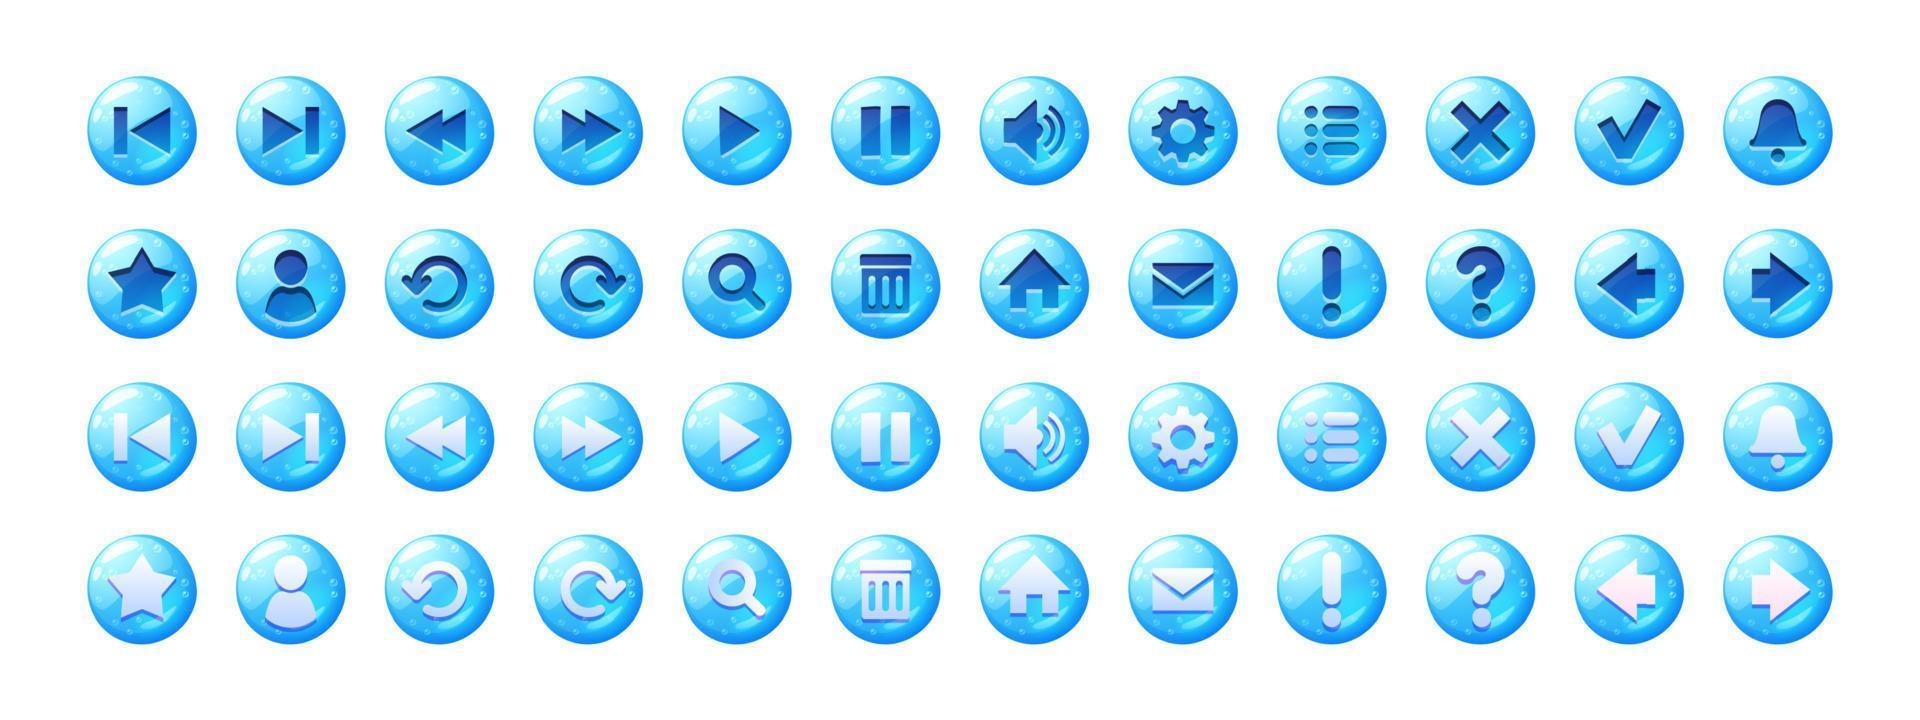 Circle buttons with blue jelly texture and icons vector